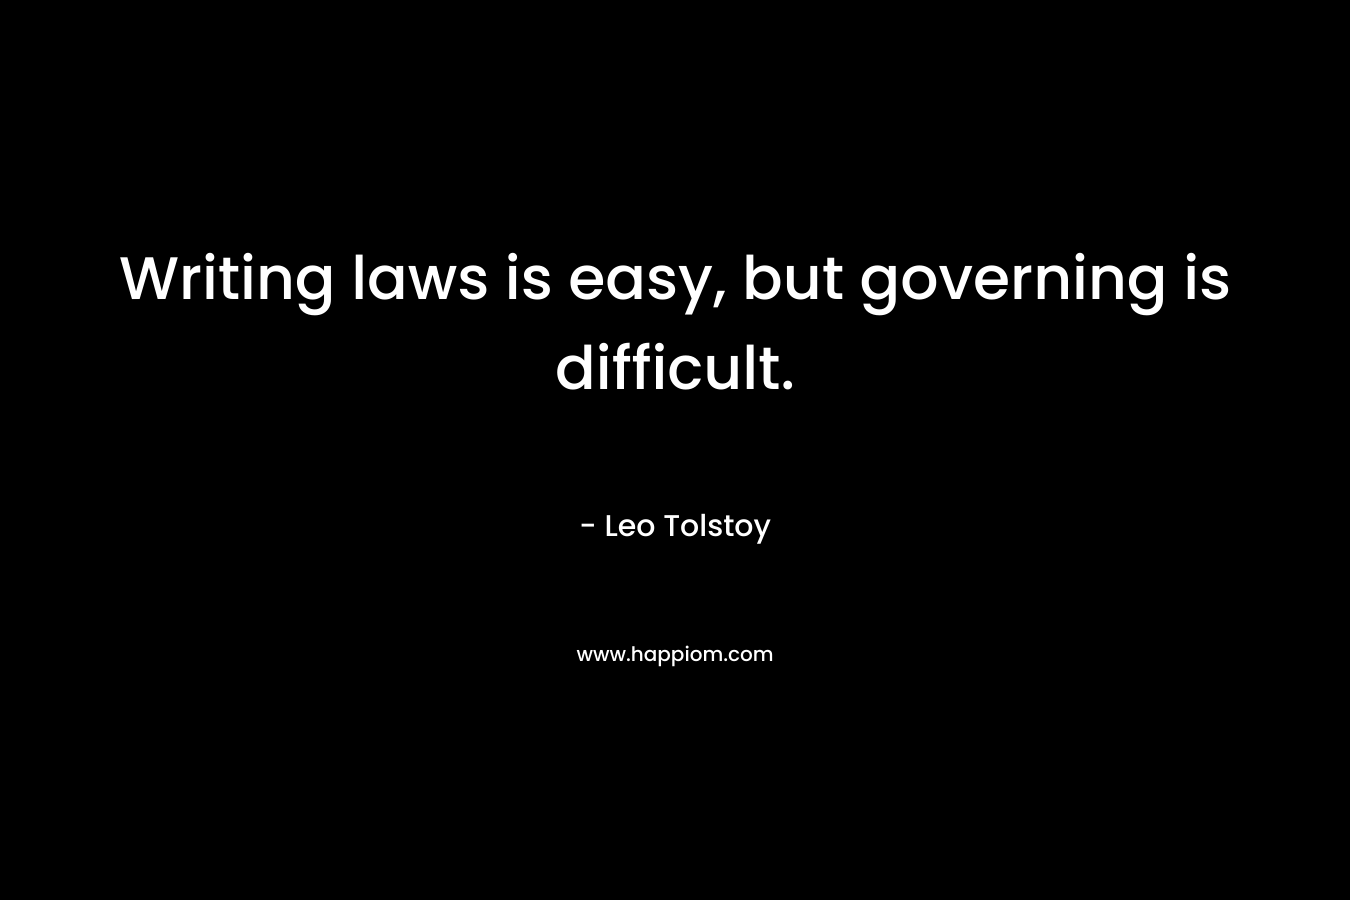 Writing laws is easy, but governing is difficult. – Leo Tolstoy